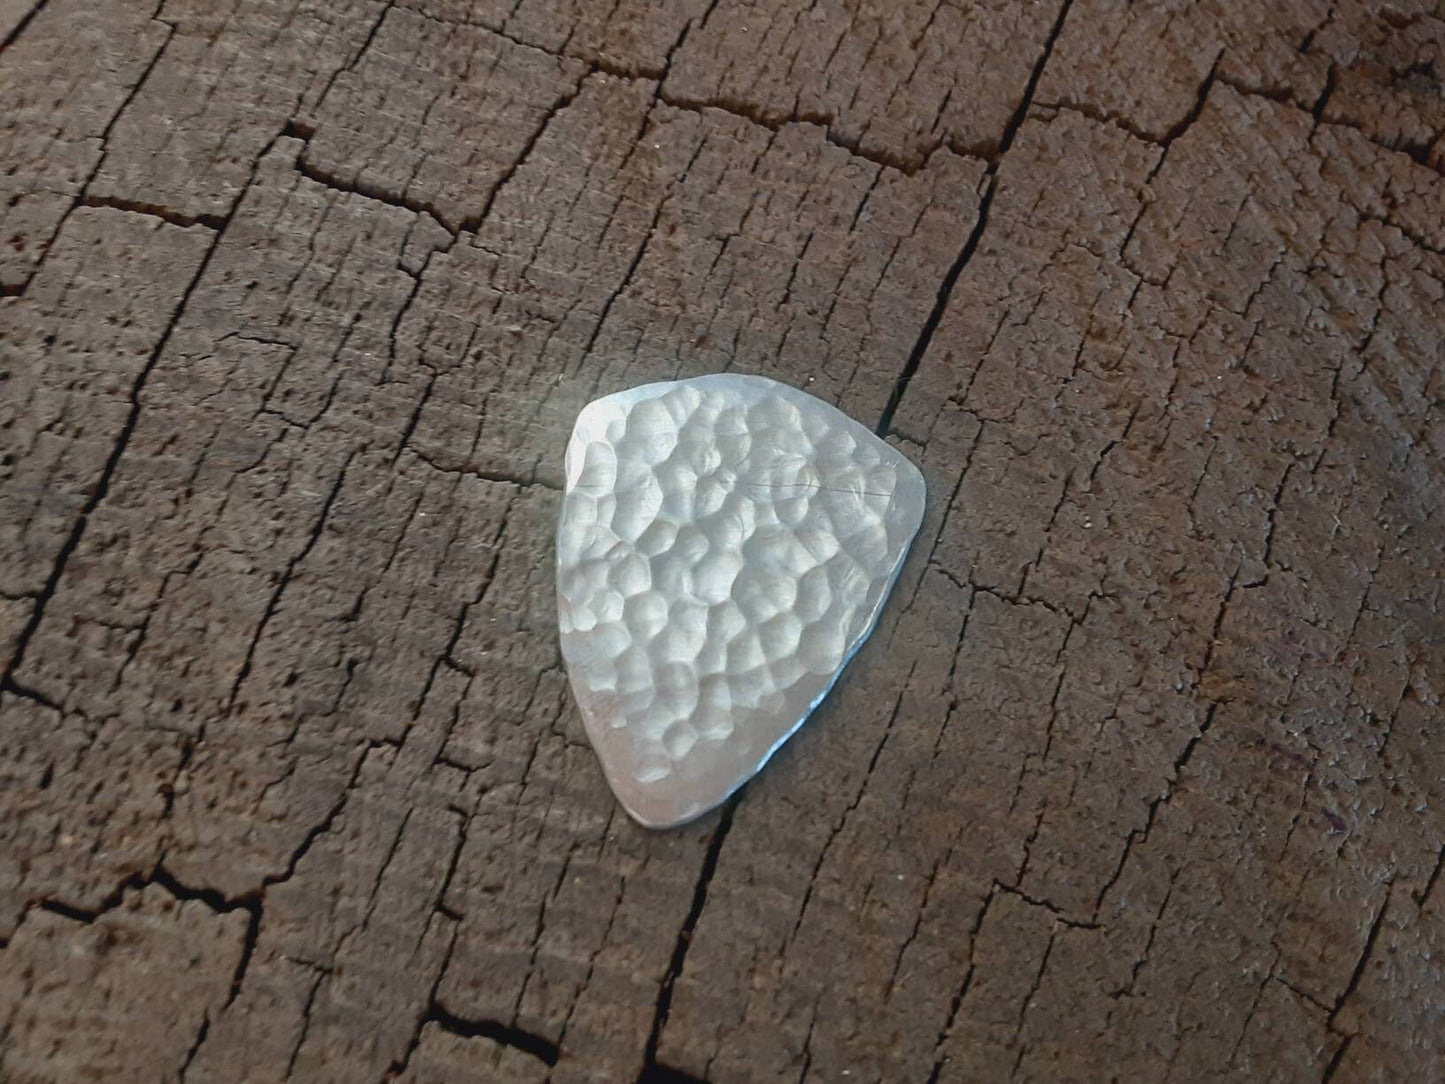 Aluminum shield shaped guitar pick playable with norse crow symbol